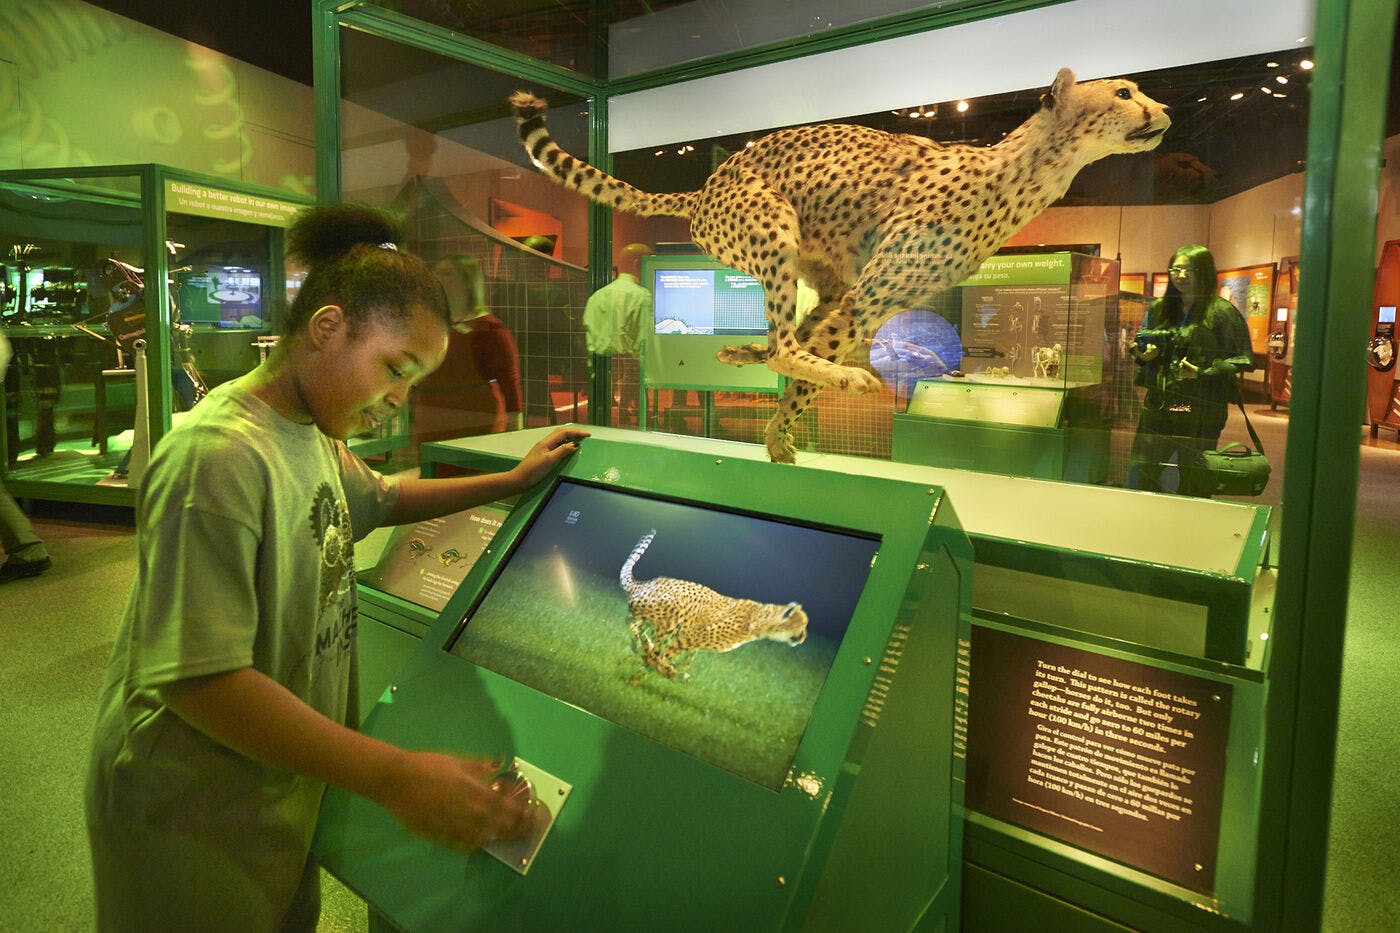 In a digital interactive, adjust a cheetah’s speed to see how its spine springs into action when it runs.